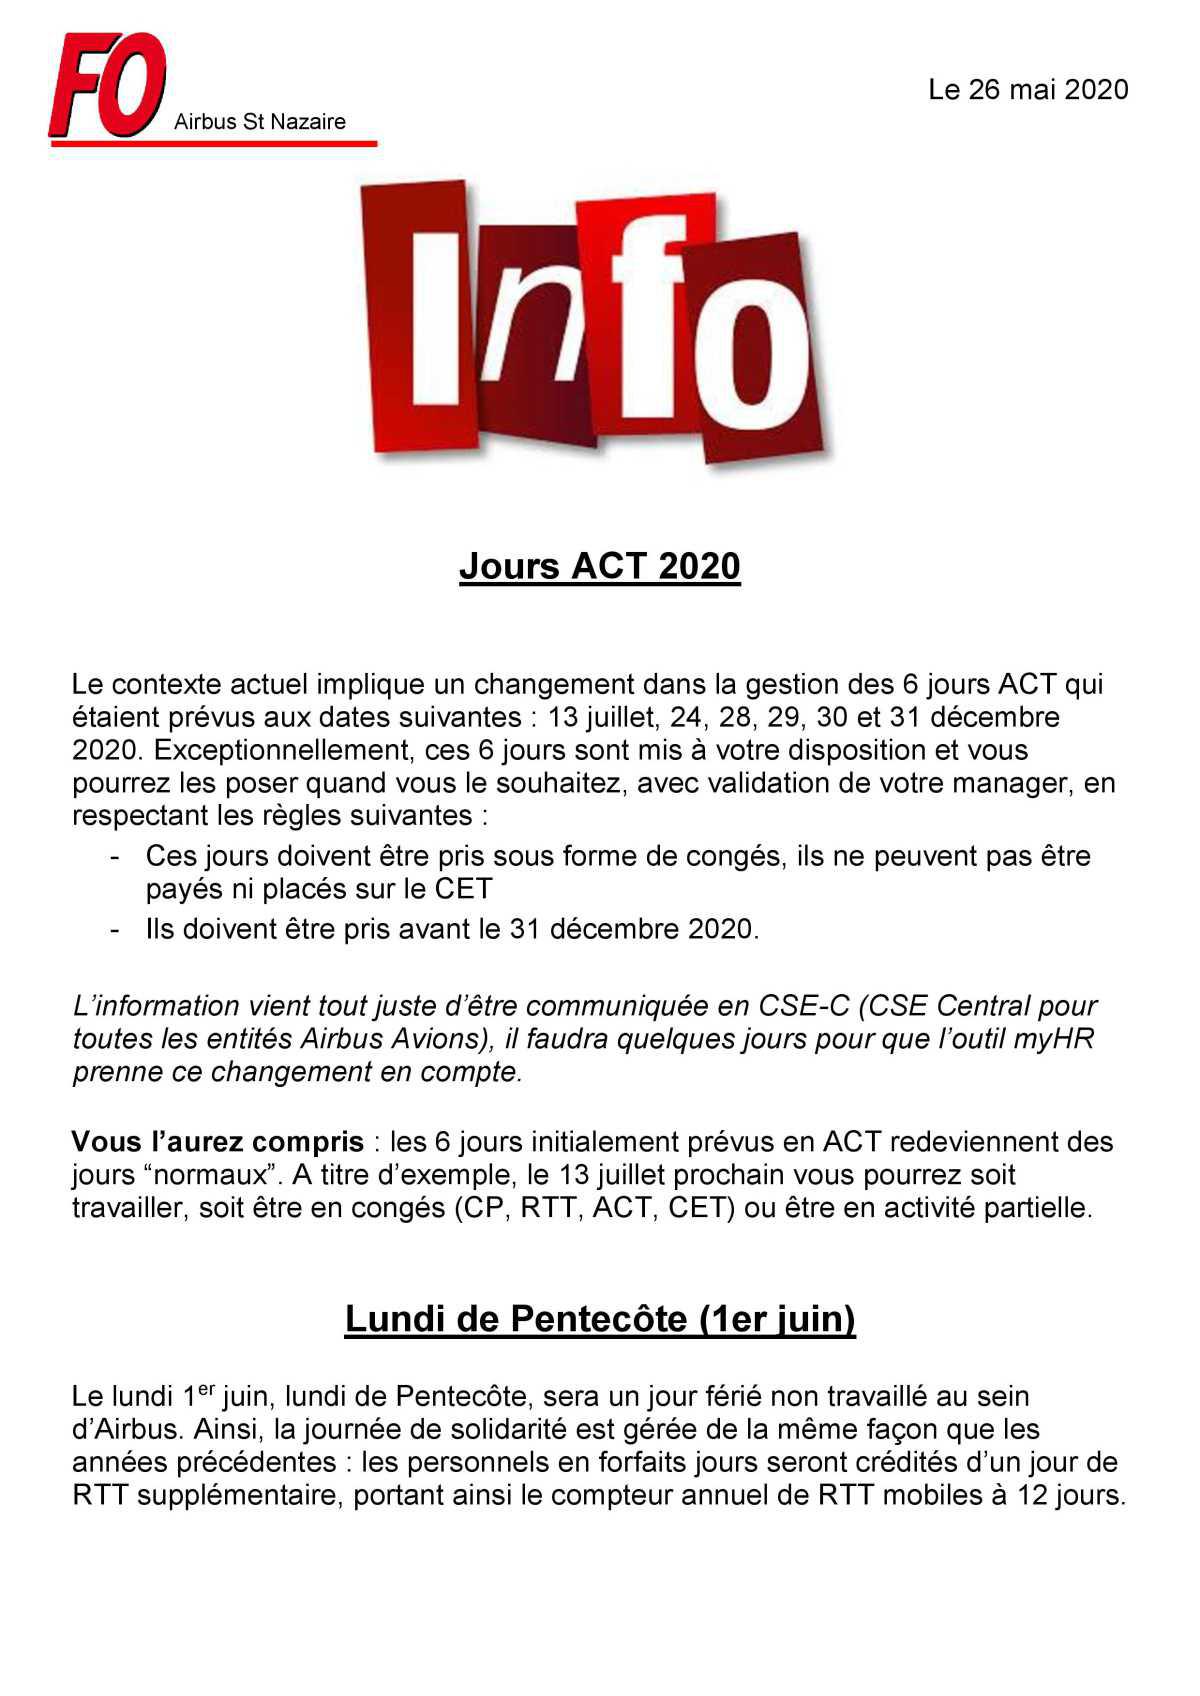 Info jours ACT 2020